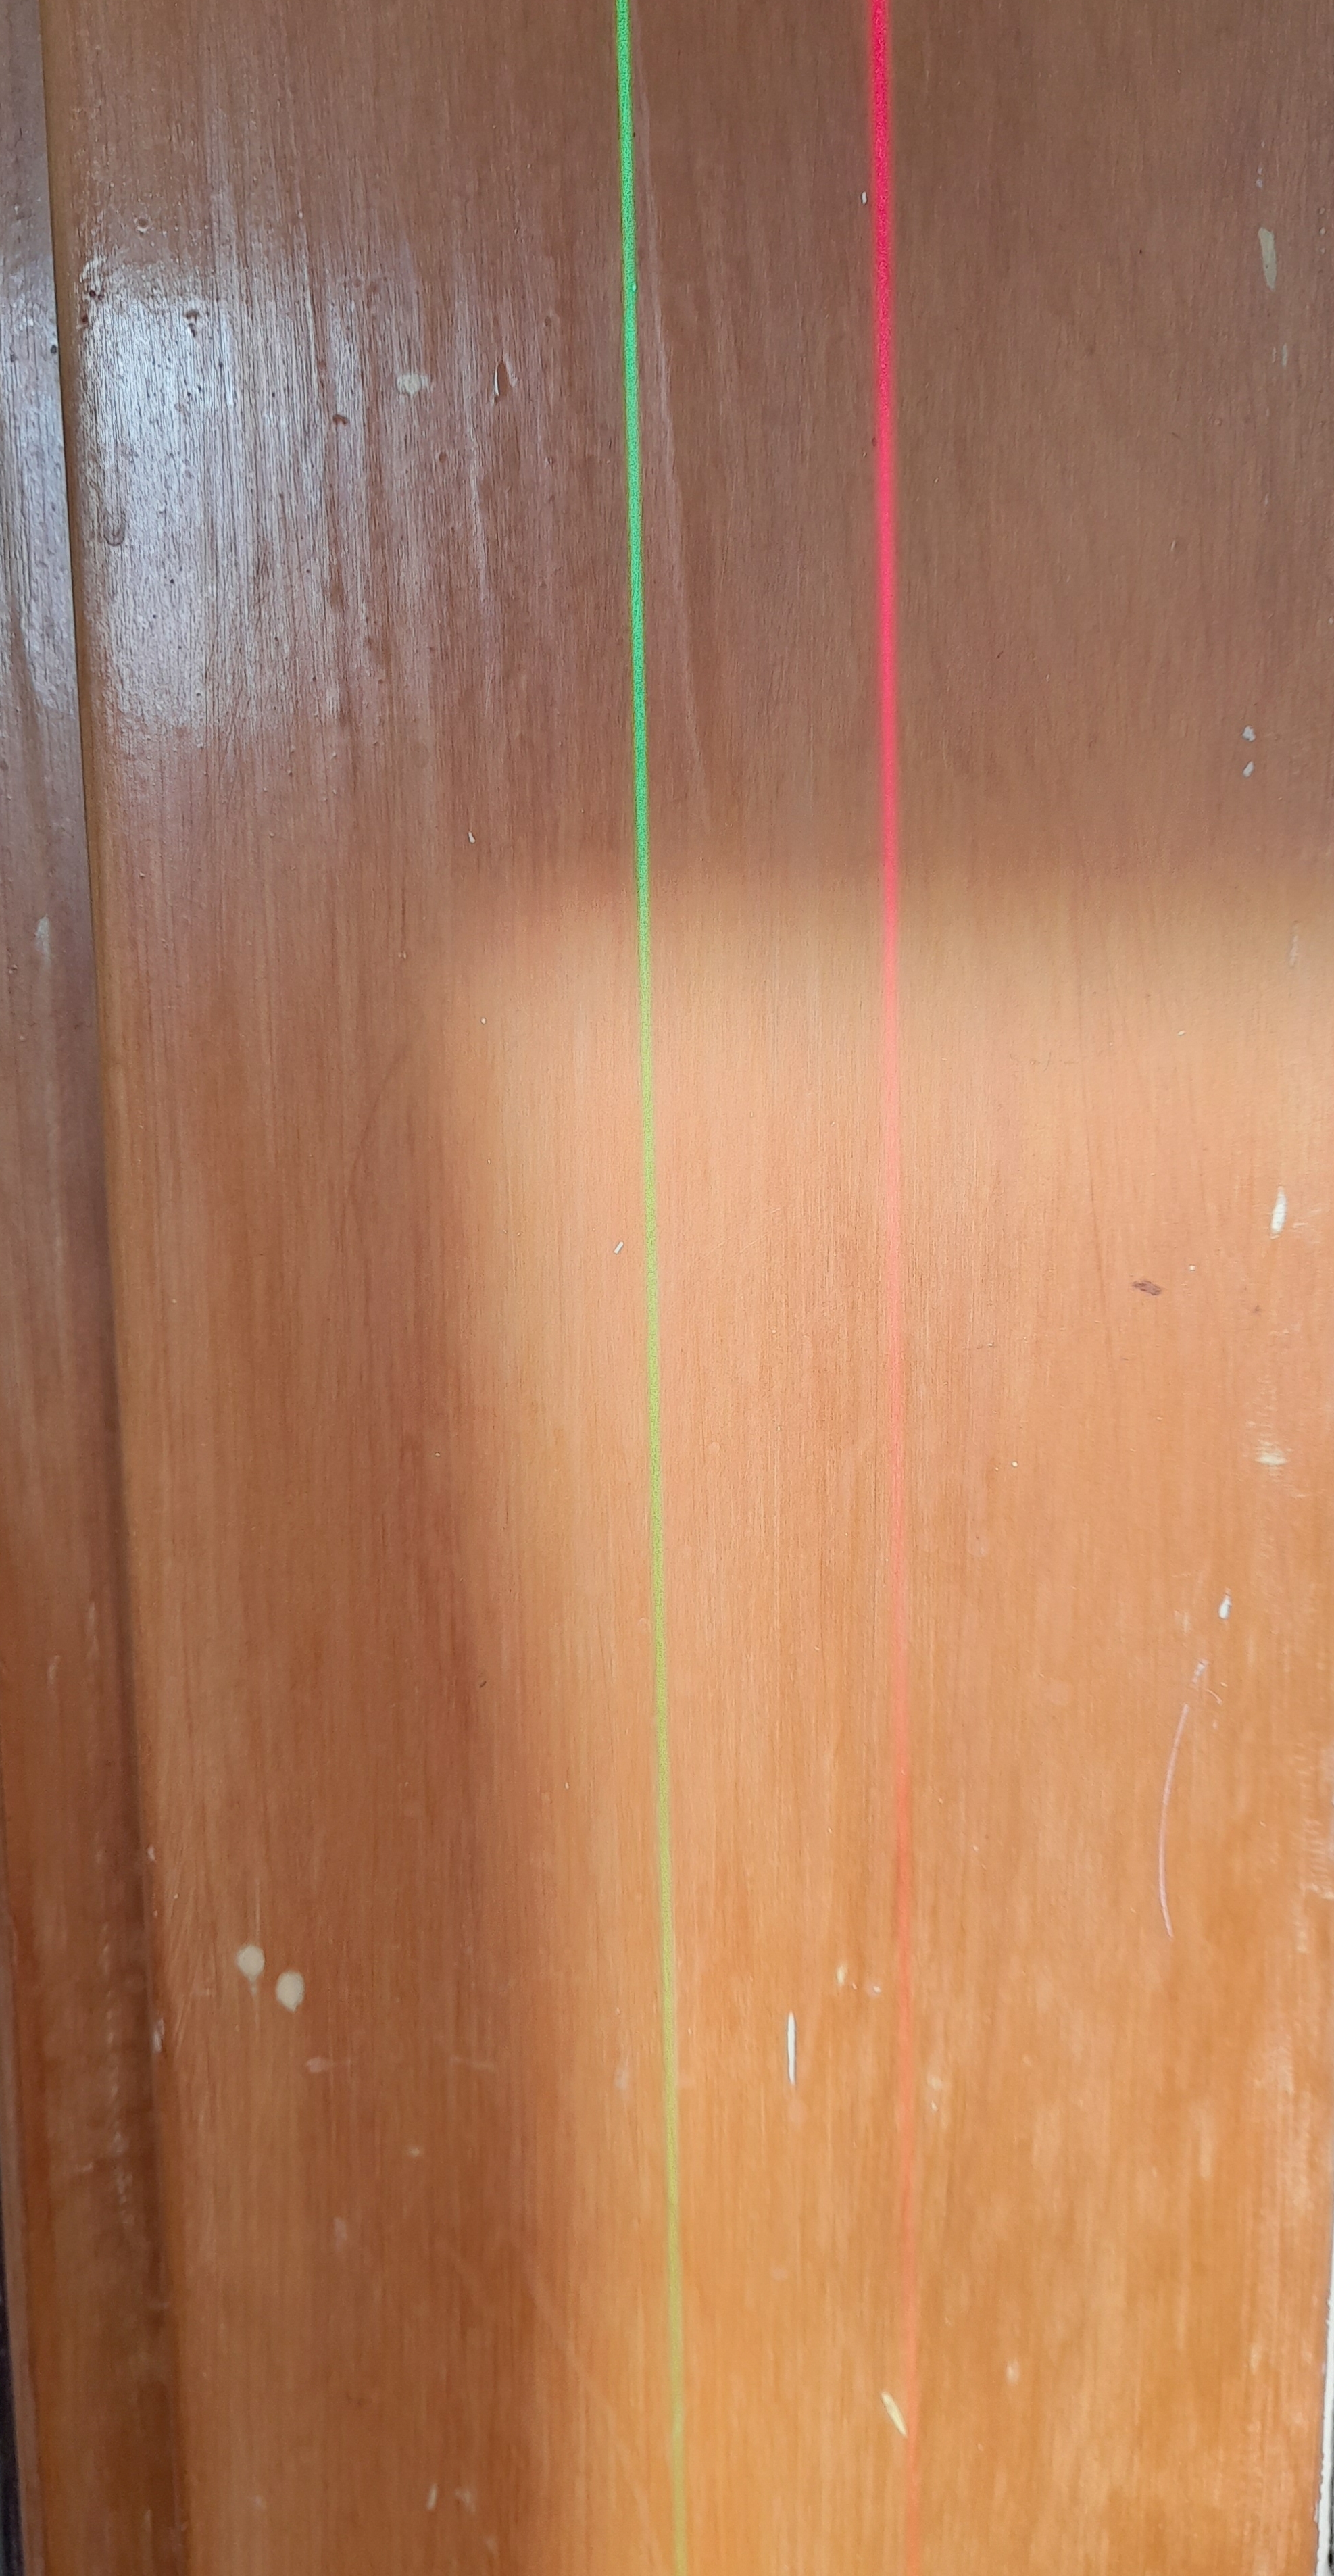 Red vs Green Line Lasers